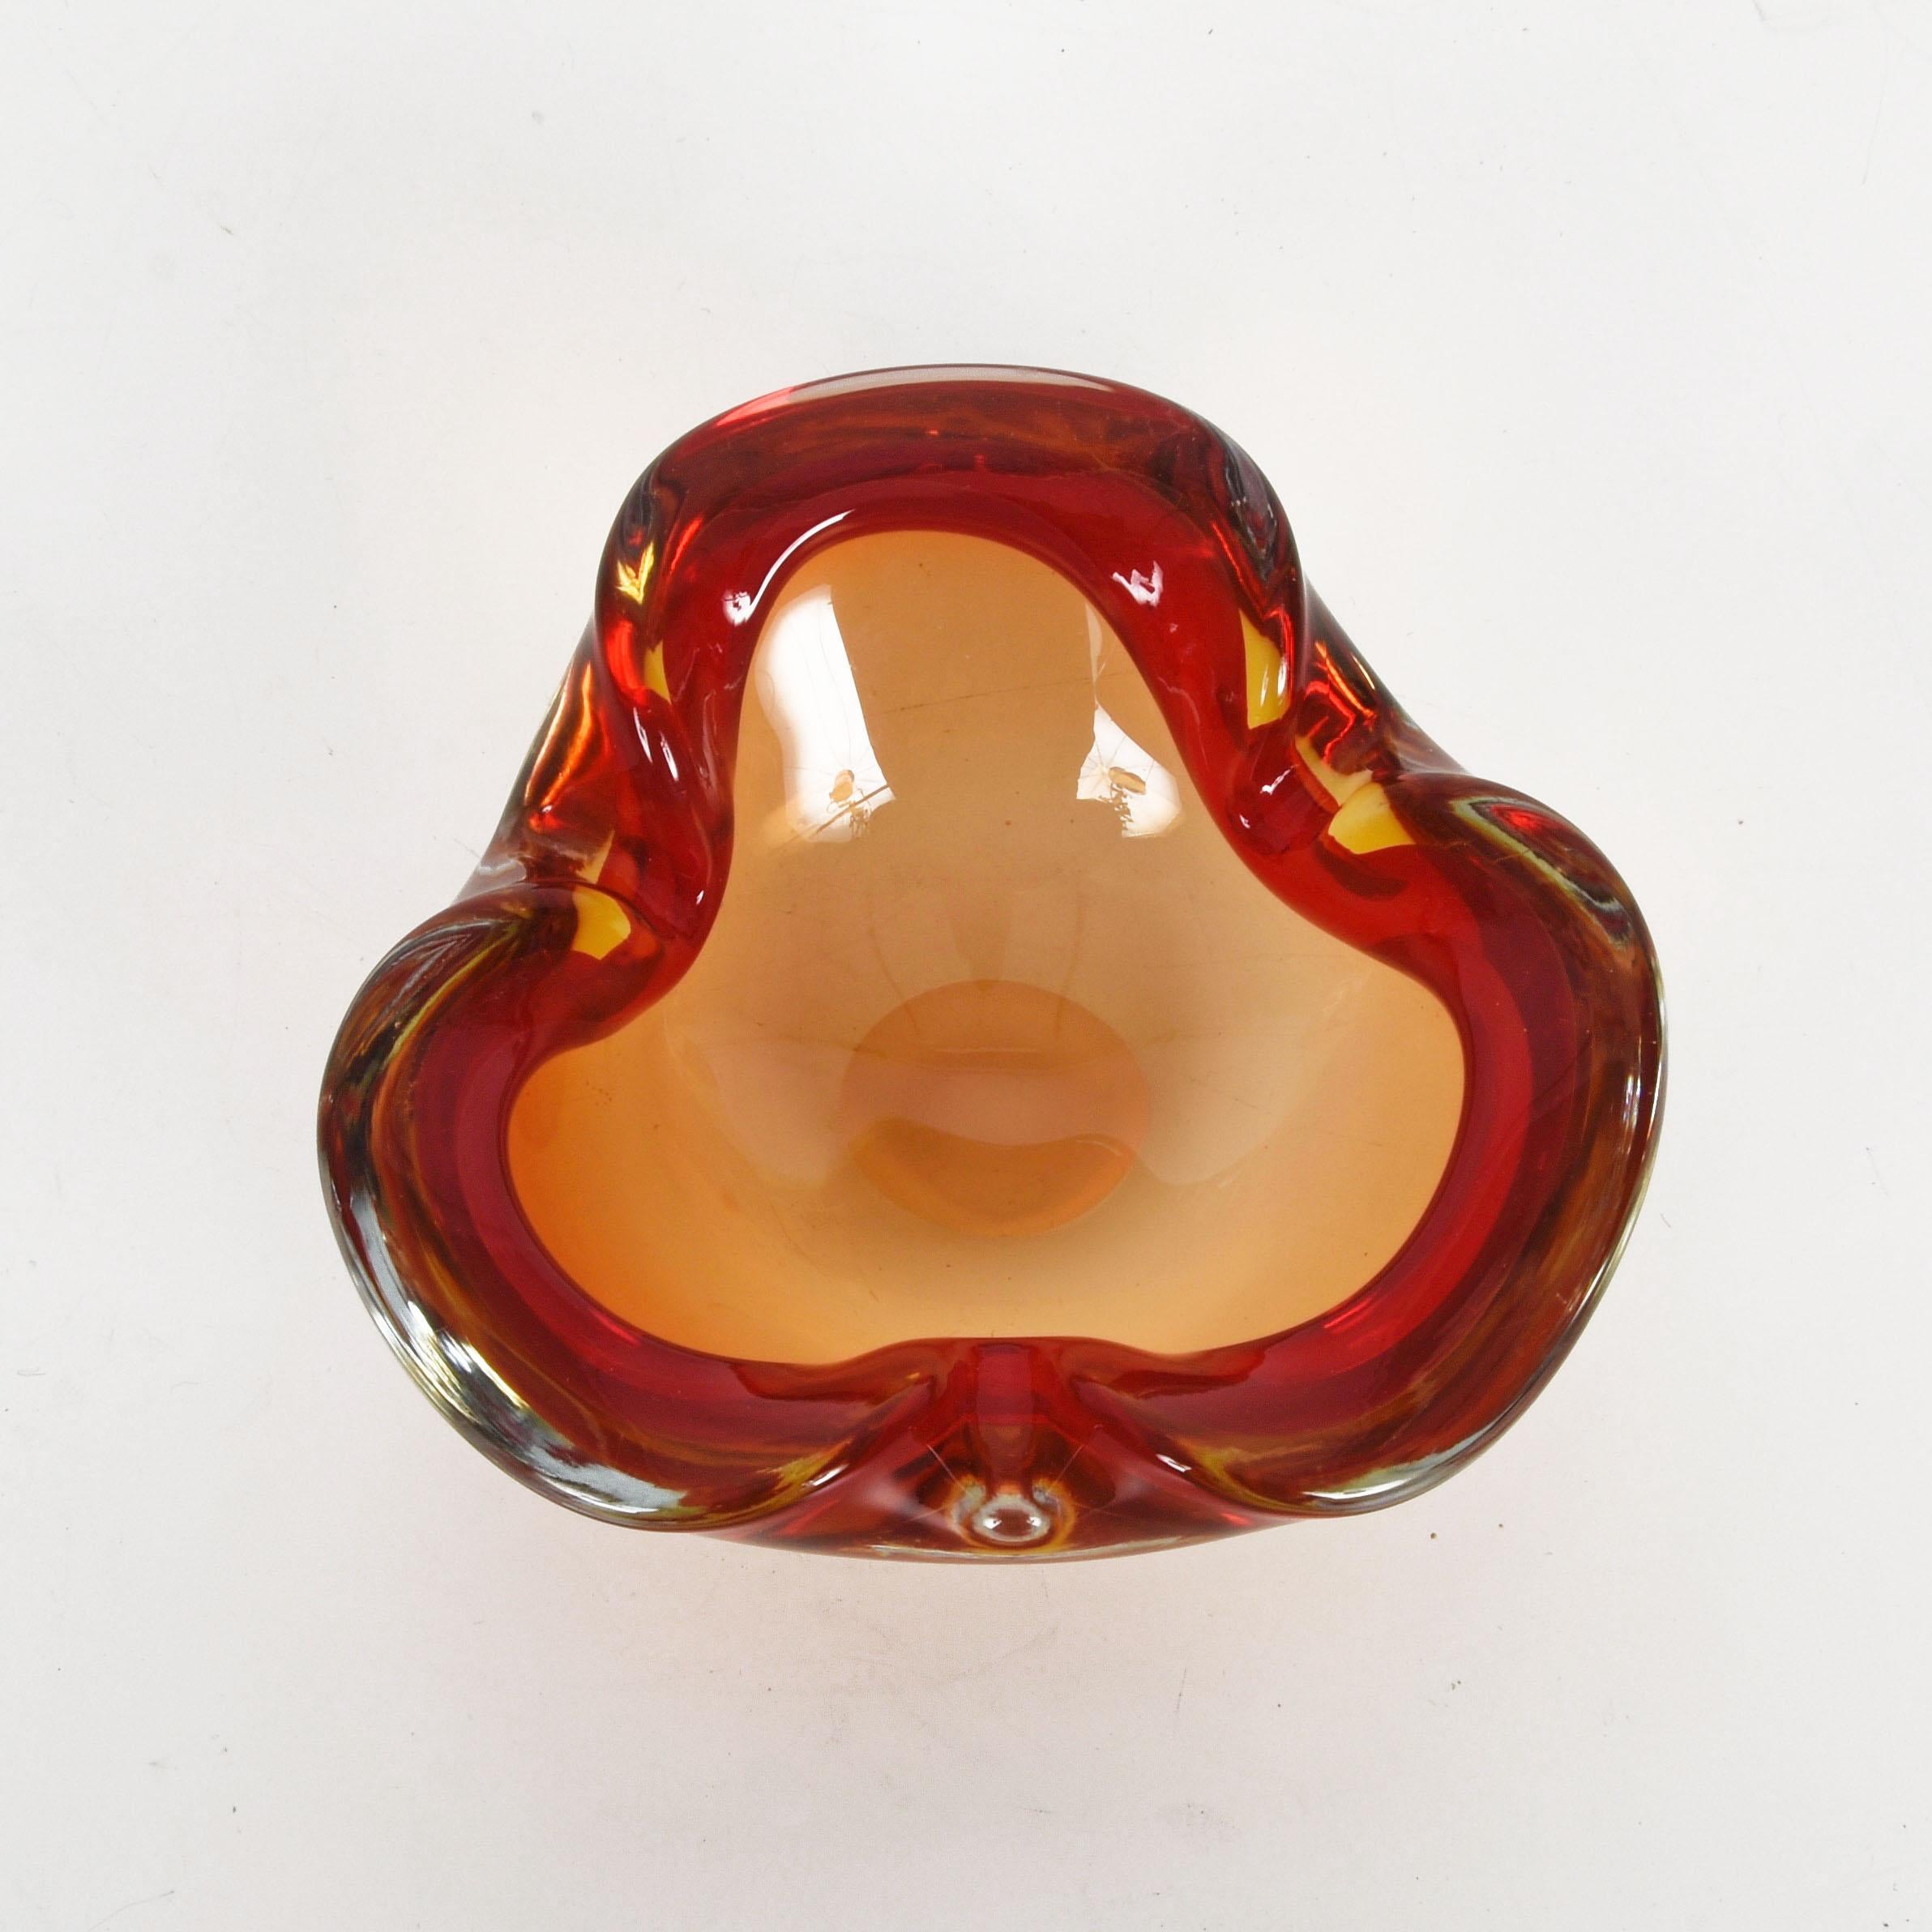 Magnificent heart-shaped ruby red Sommerso glass Murano glass bowl or ashtray. This amazing piece was produced in Italy during the 1960s.

This wonderful piece is a perfect blend of sinuous lines and Murano glass colors due to the mastery of the